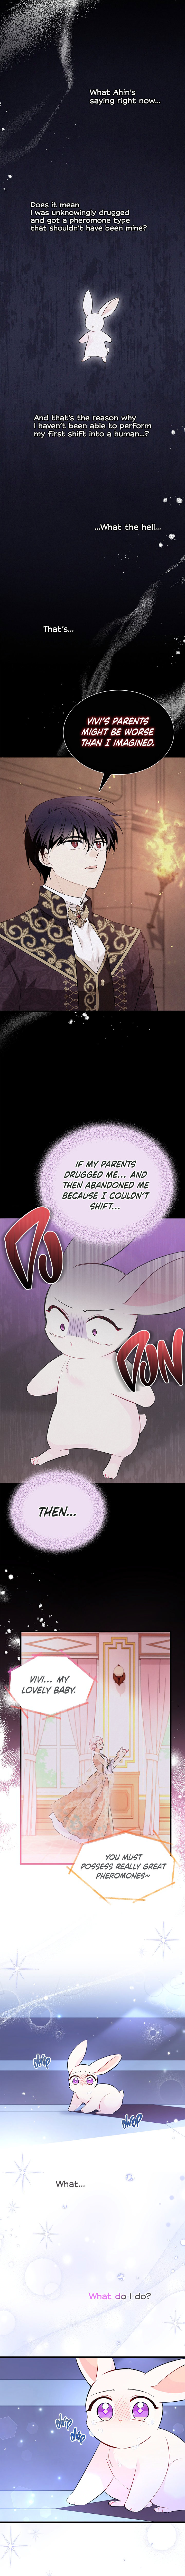 The Symbiotic Relationship Between A Rabbit and A Black Panther - Chapter 58 Page 9